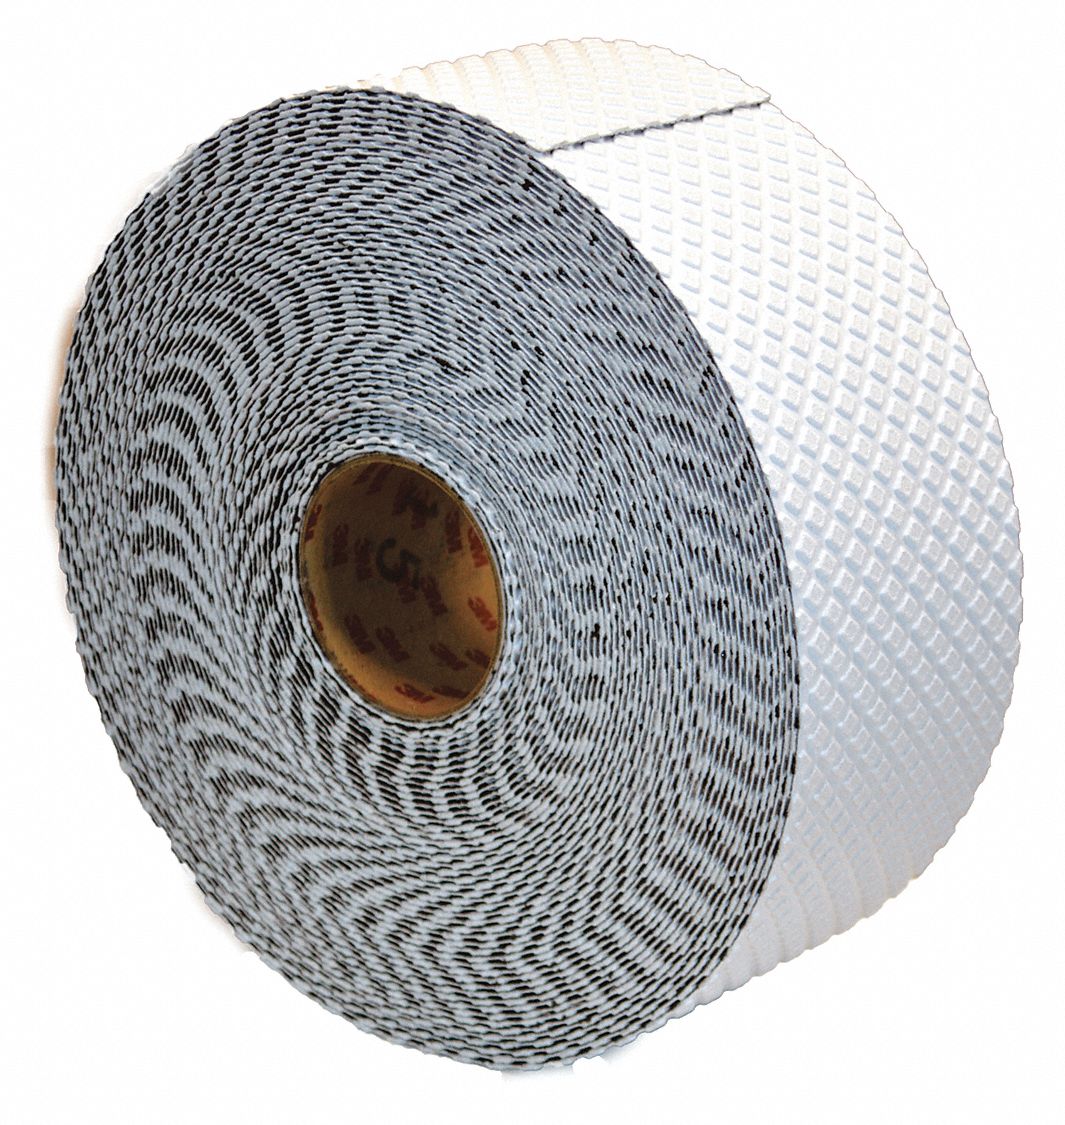 Pavement Marking Tape: Reflective White, 300 ft Lg, 5 in Wd